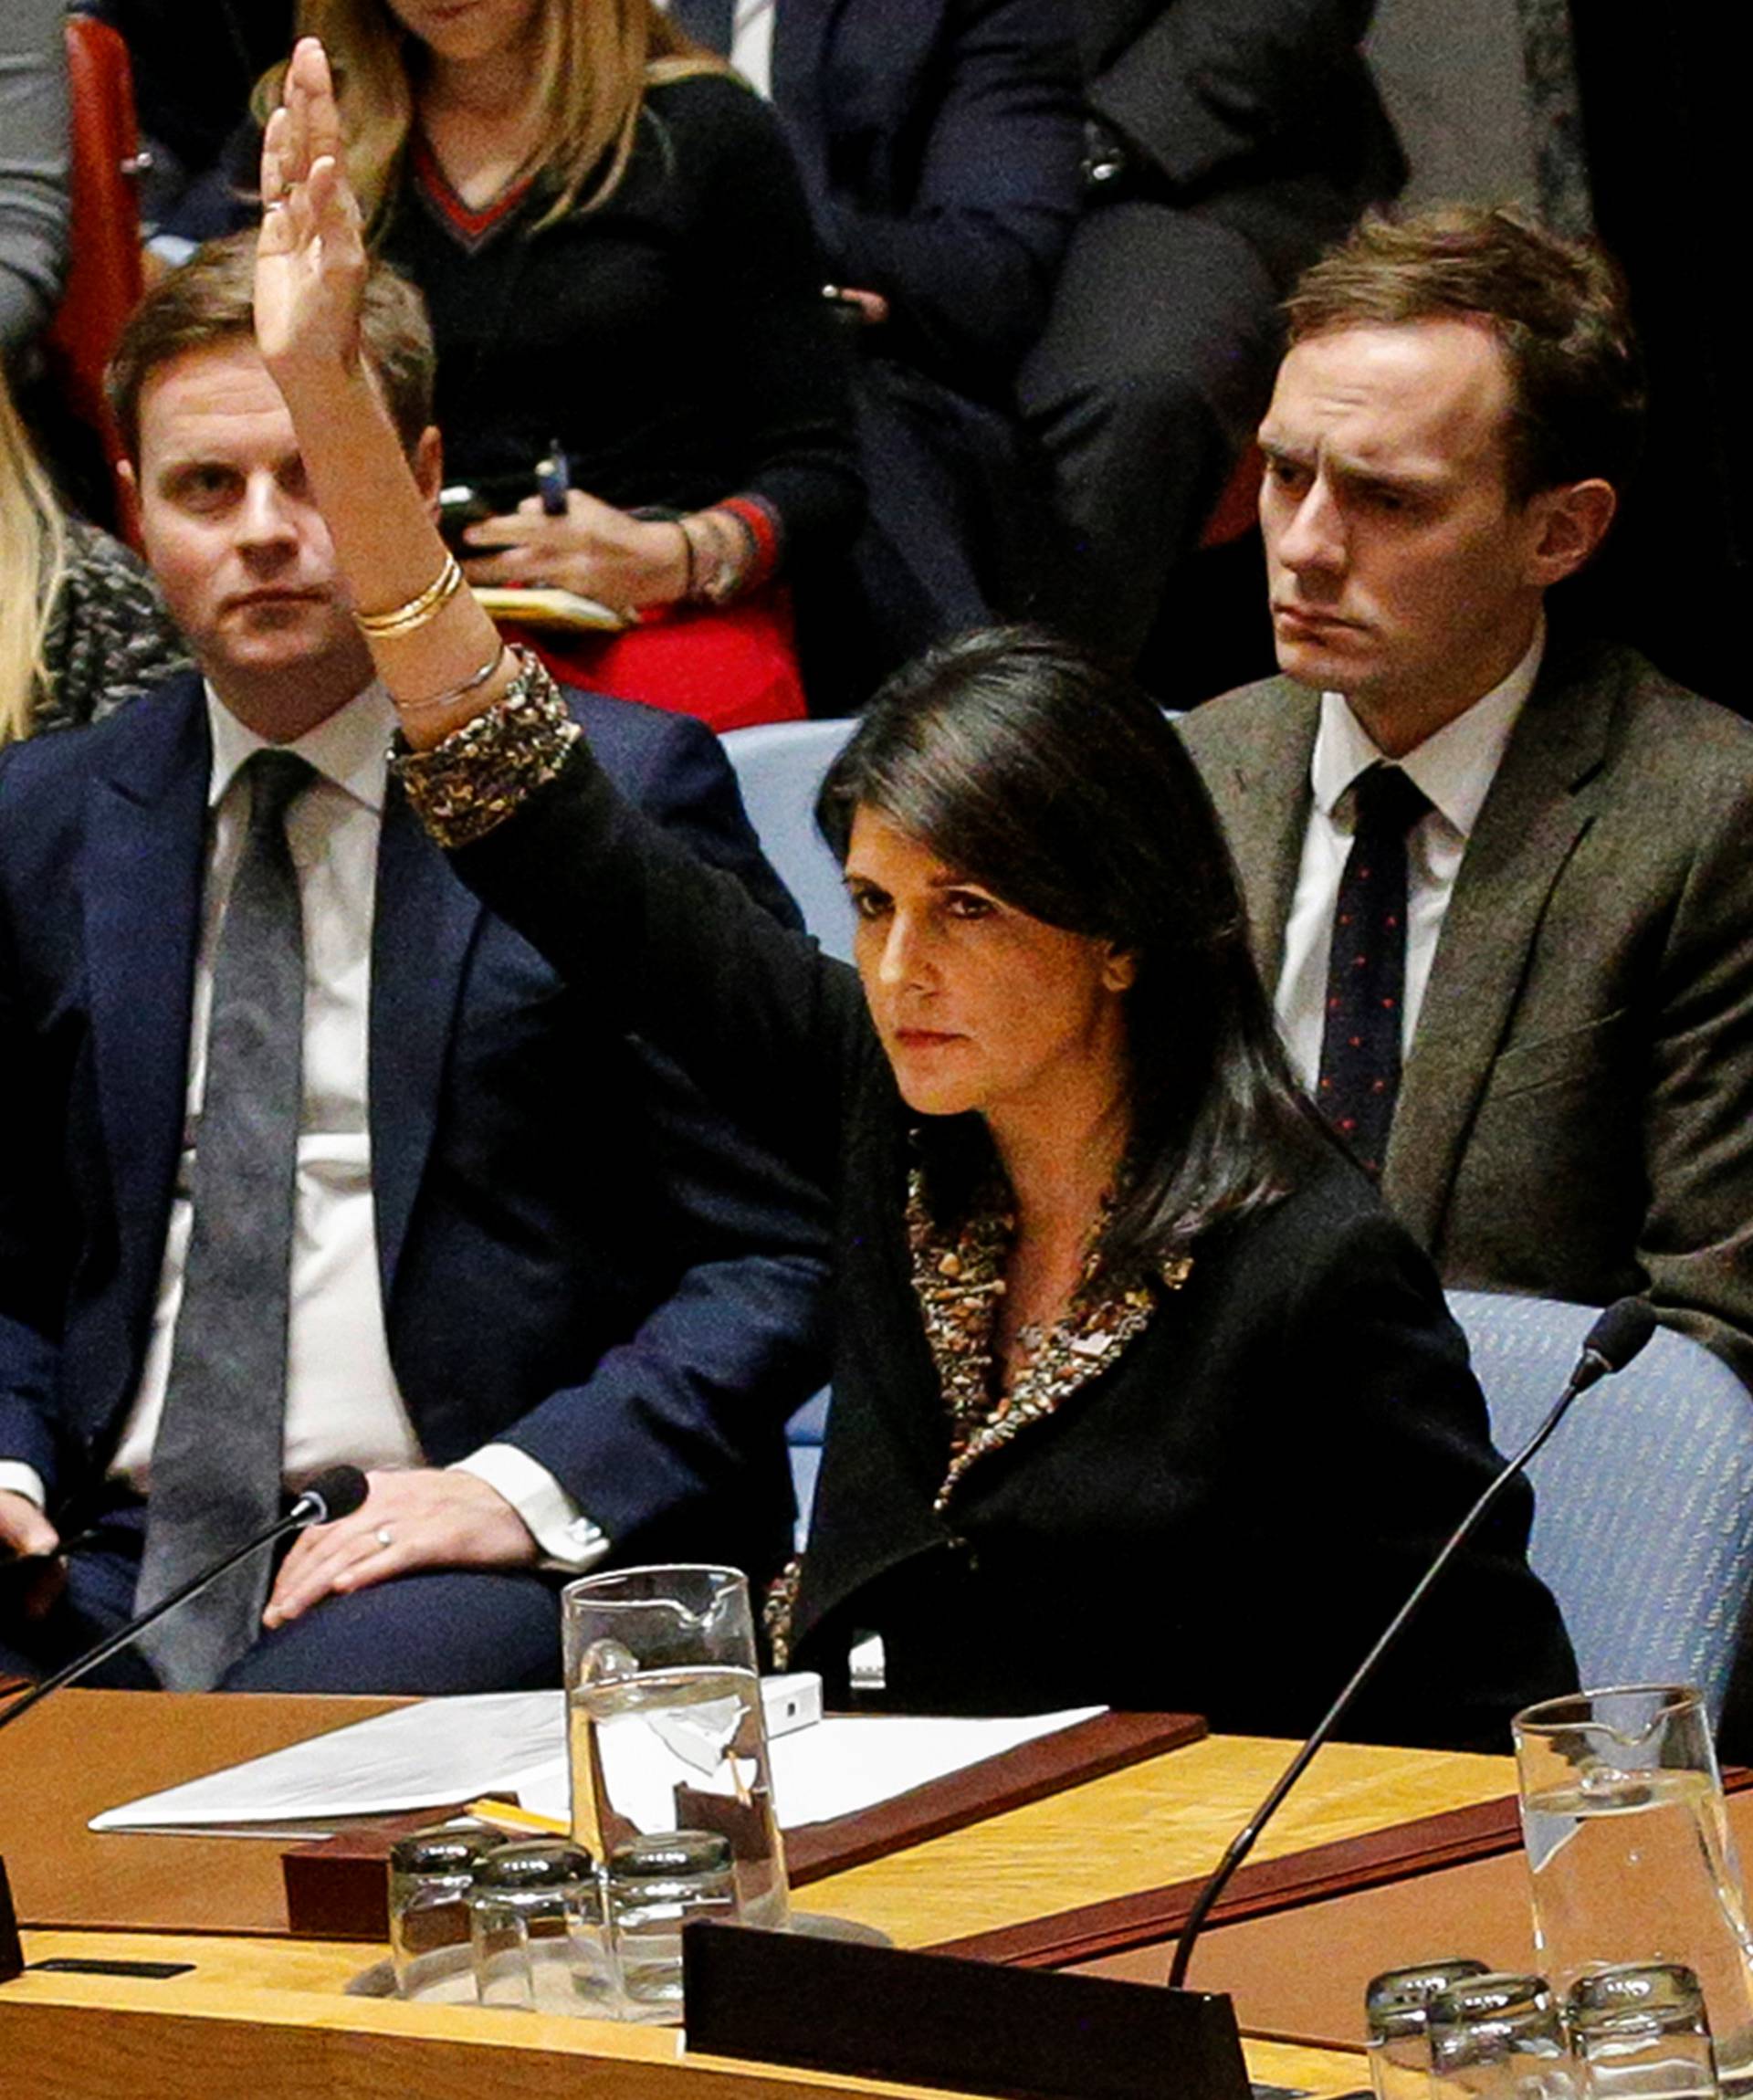 U.S. Ambassador to the United Nations Nikki Haley vetos an Egyptian-drafted resolution regarding recent decisions concerning the status of Jerusalem, during the United Nations Security Council meeting in New York